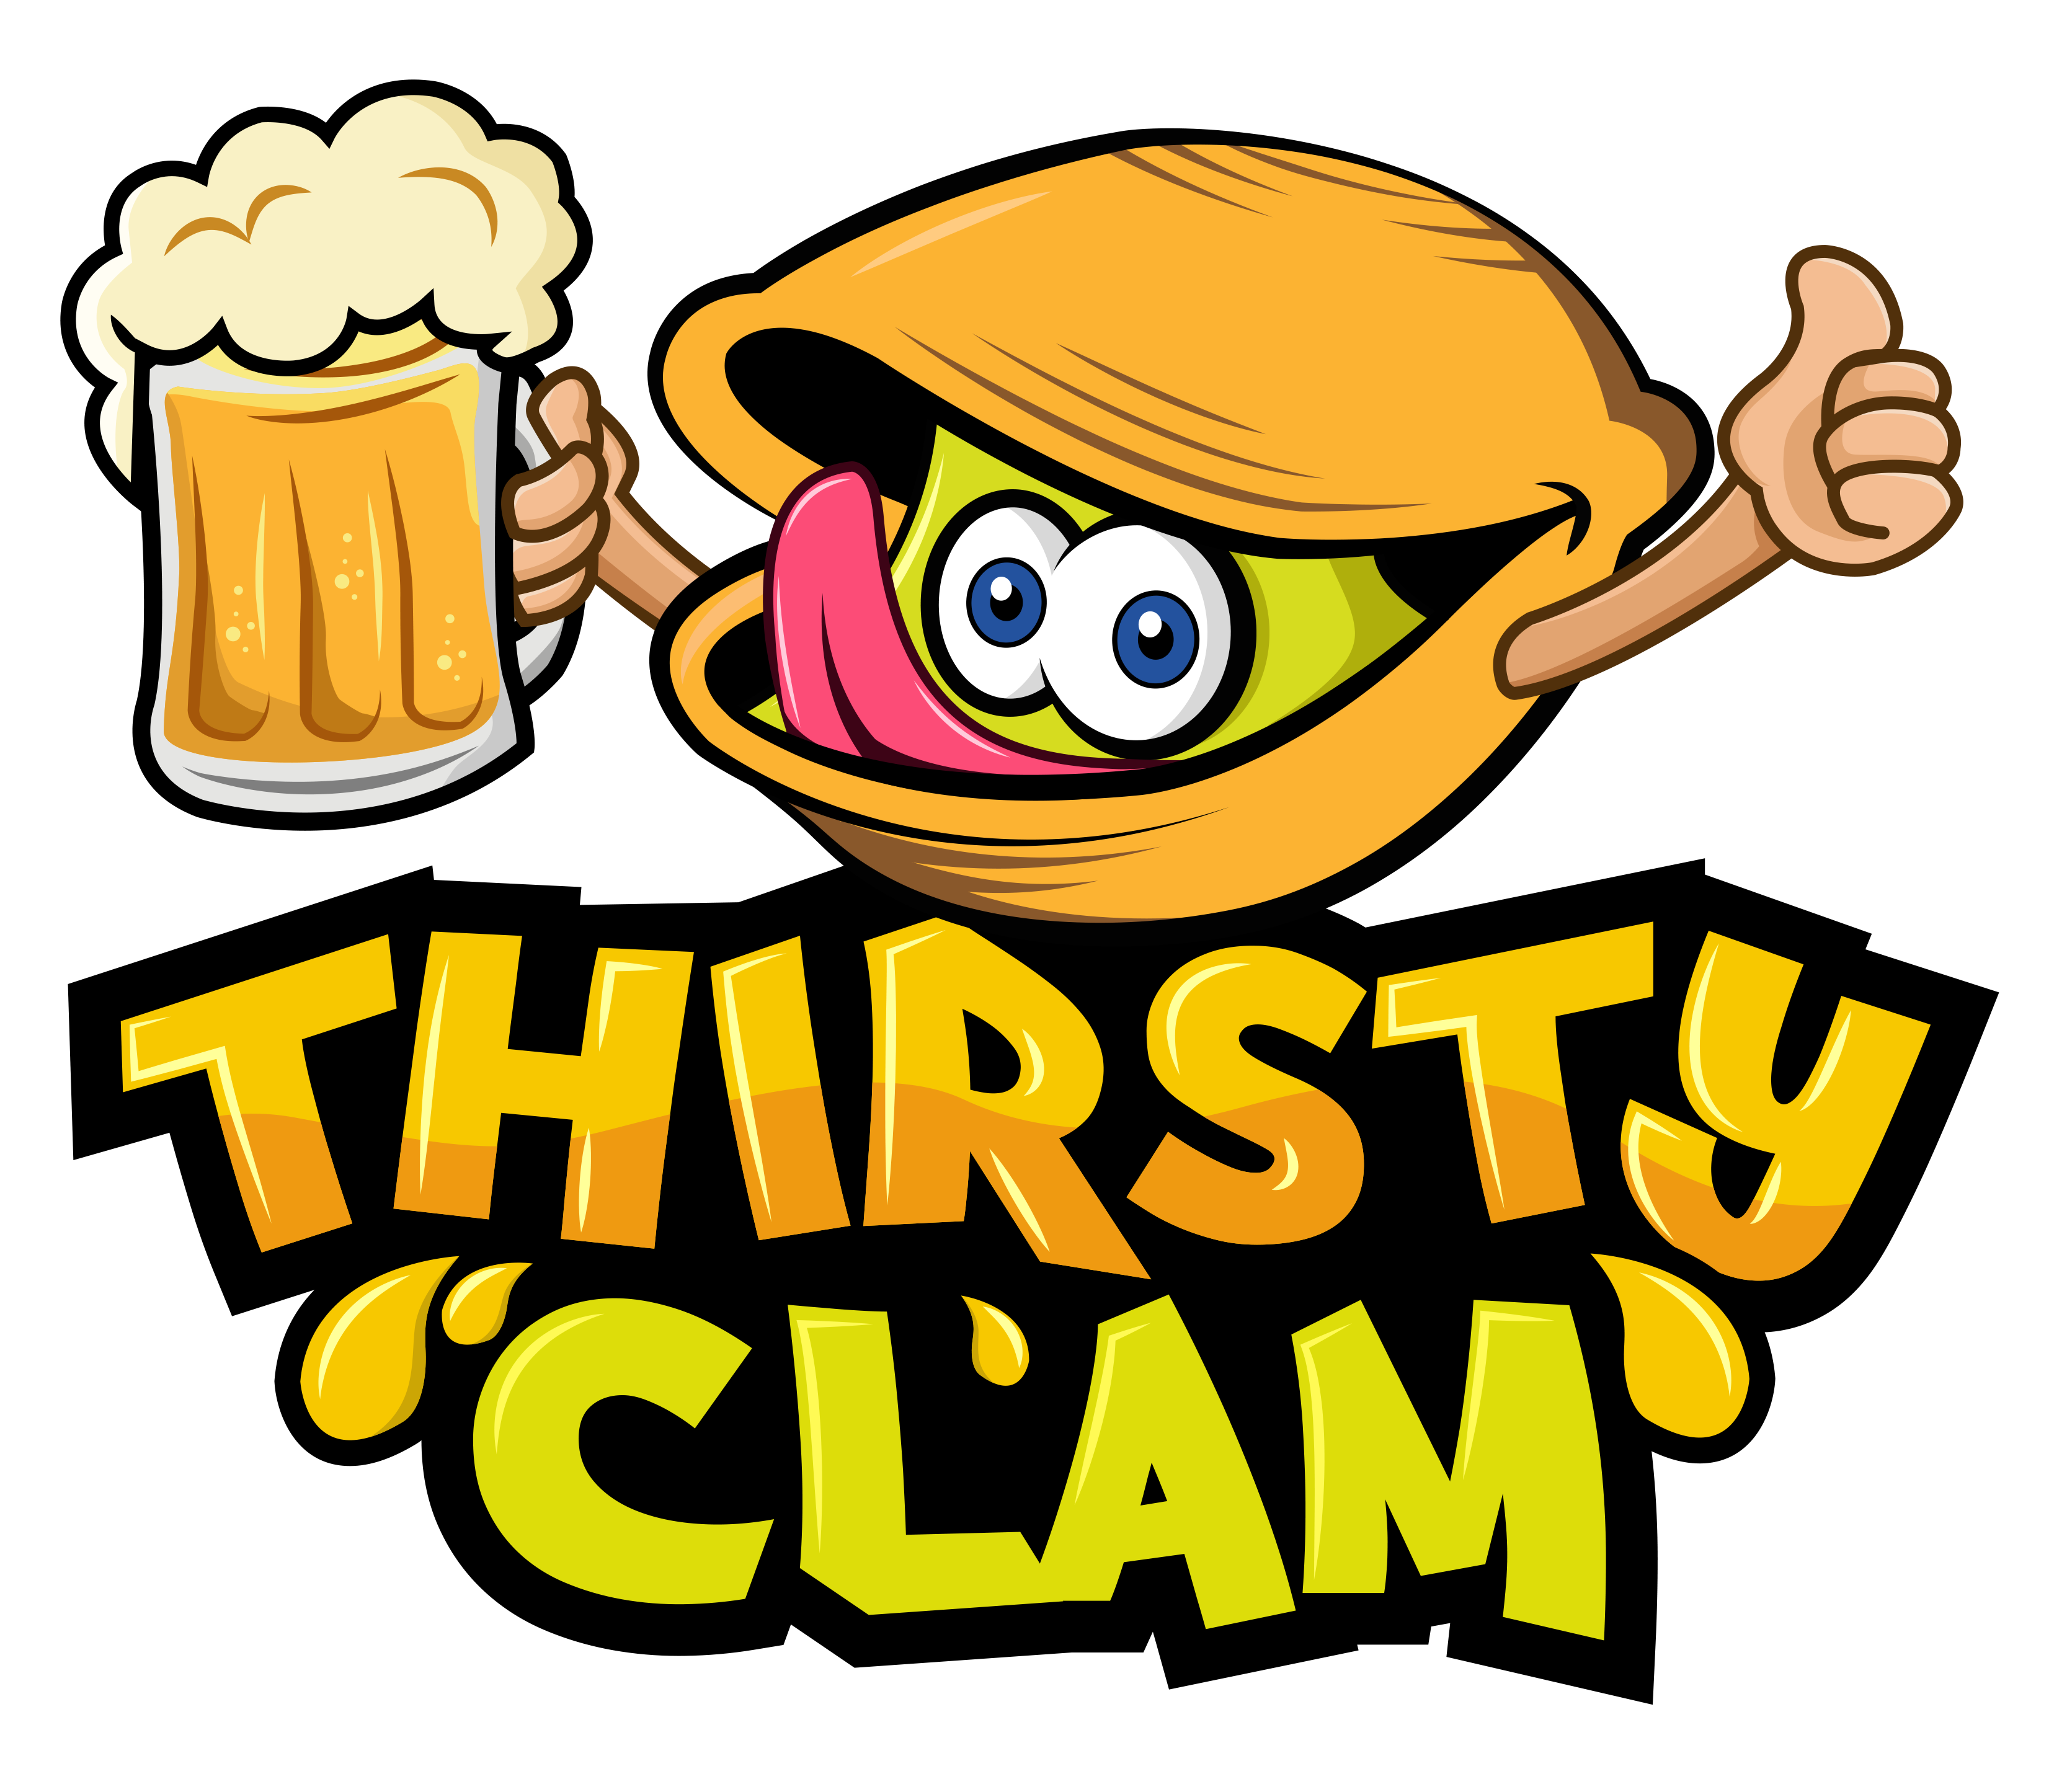 The Thirsty Clam 2